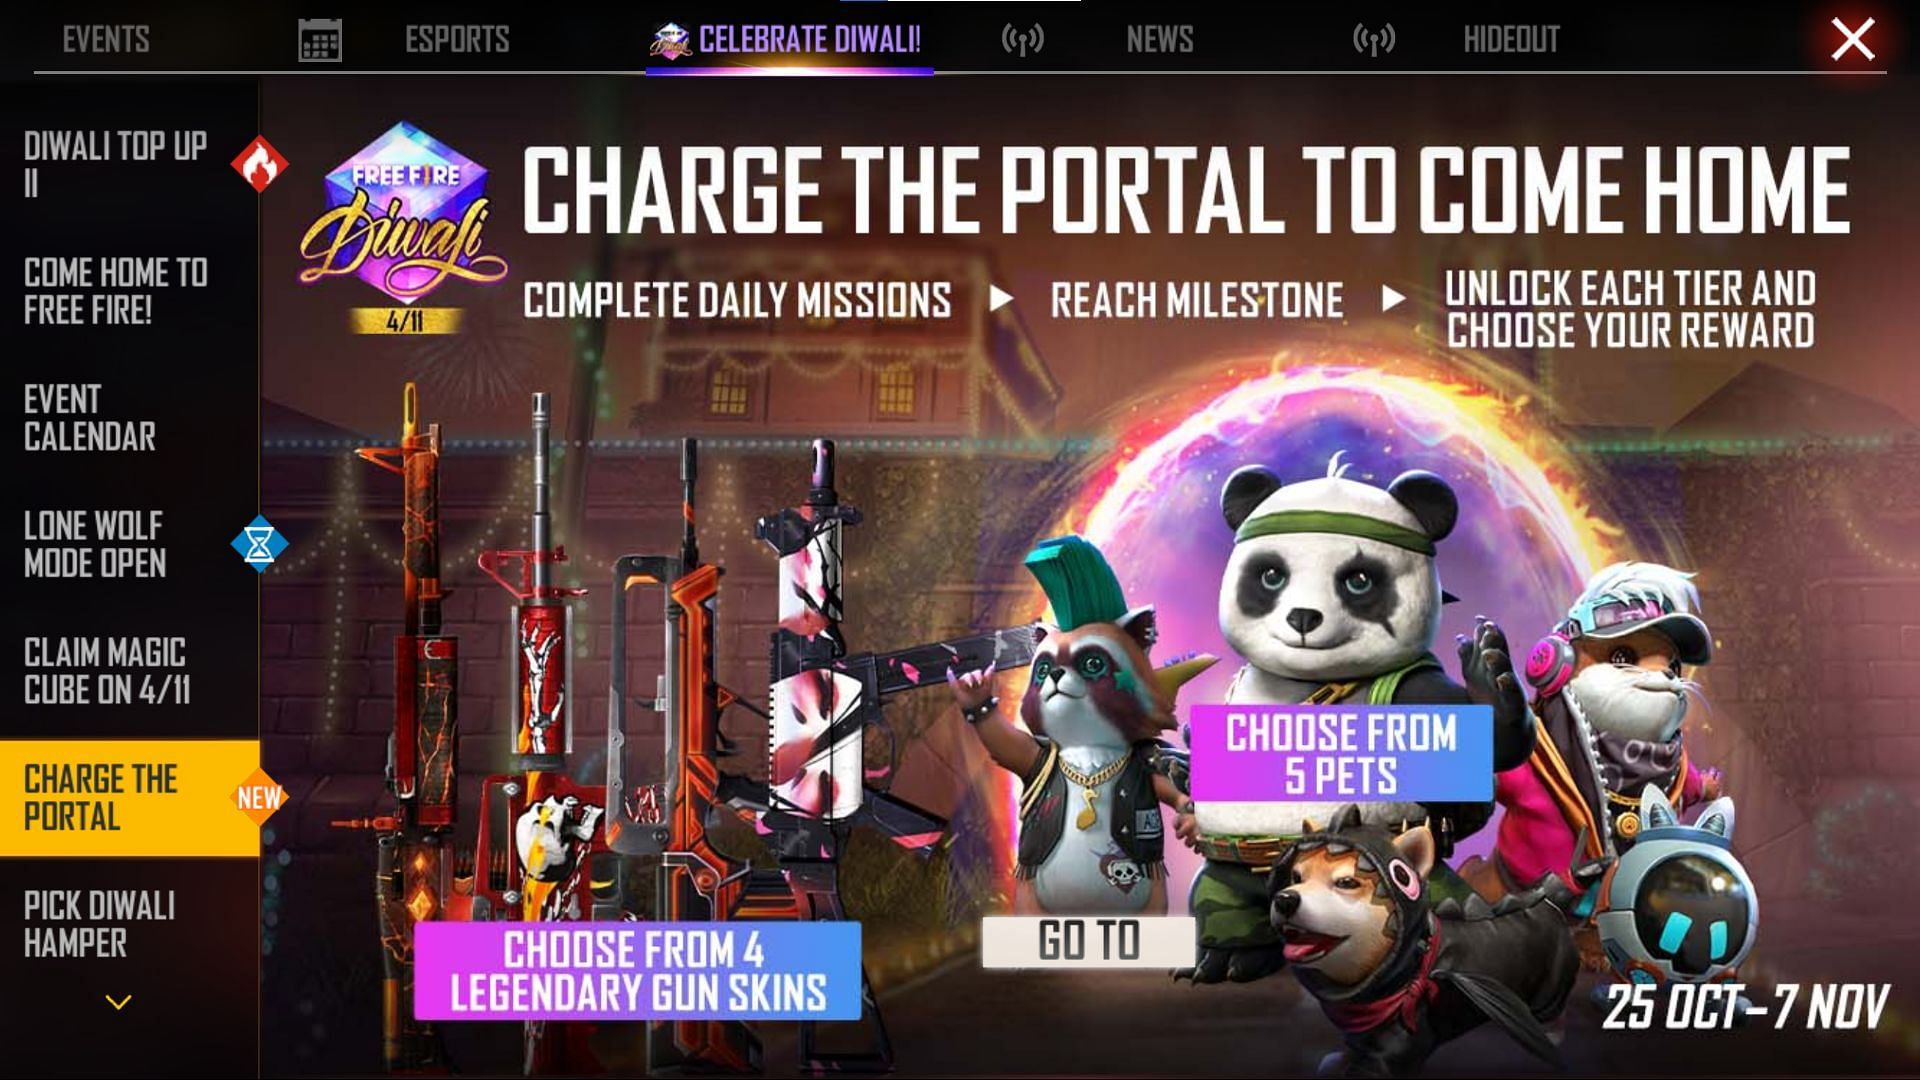 Charge the Portal event provided a free gun skin during Diwali celebrations (Image via Garena)